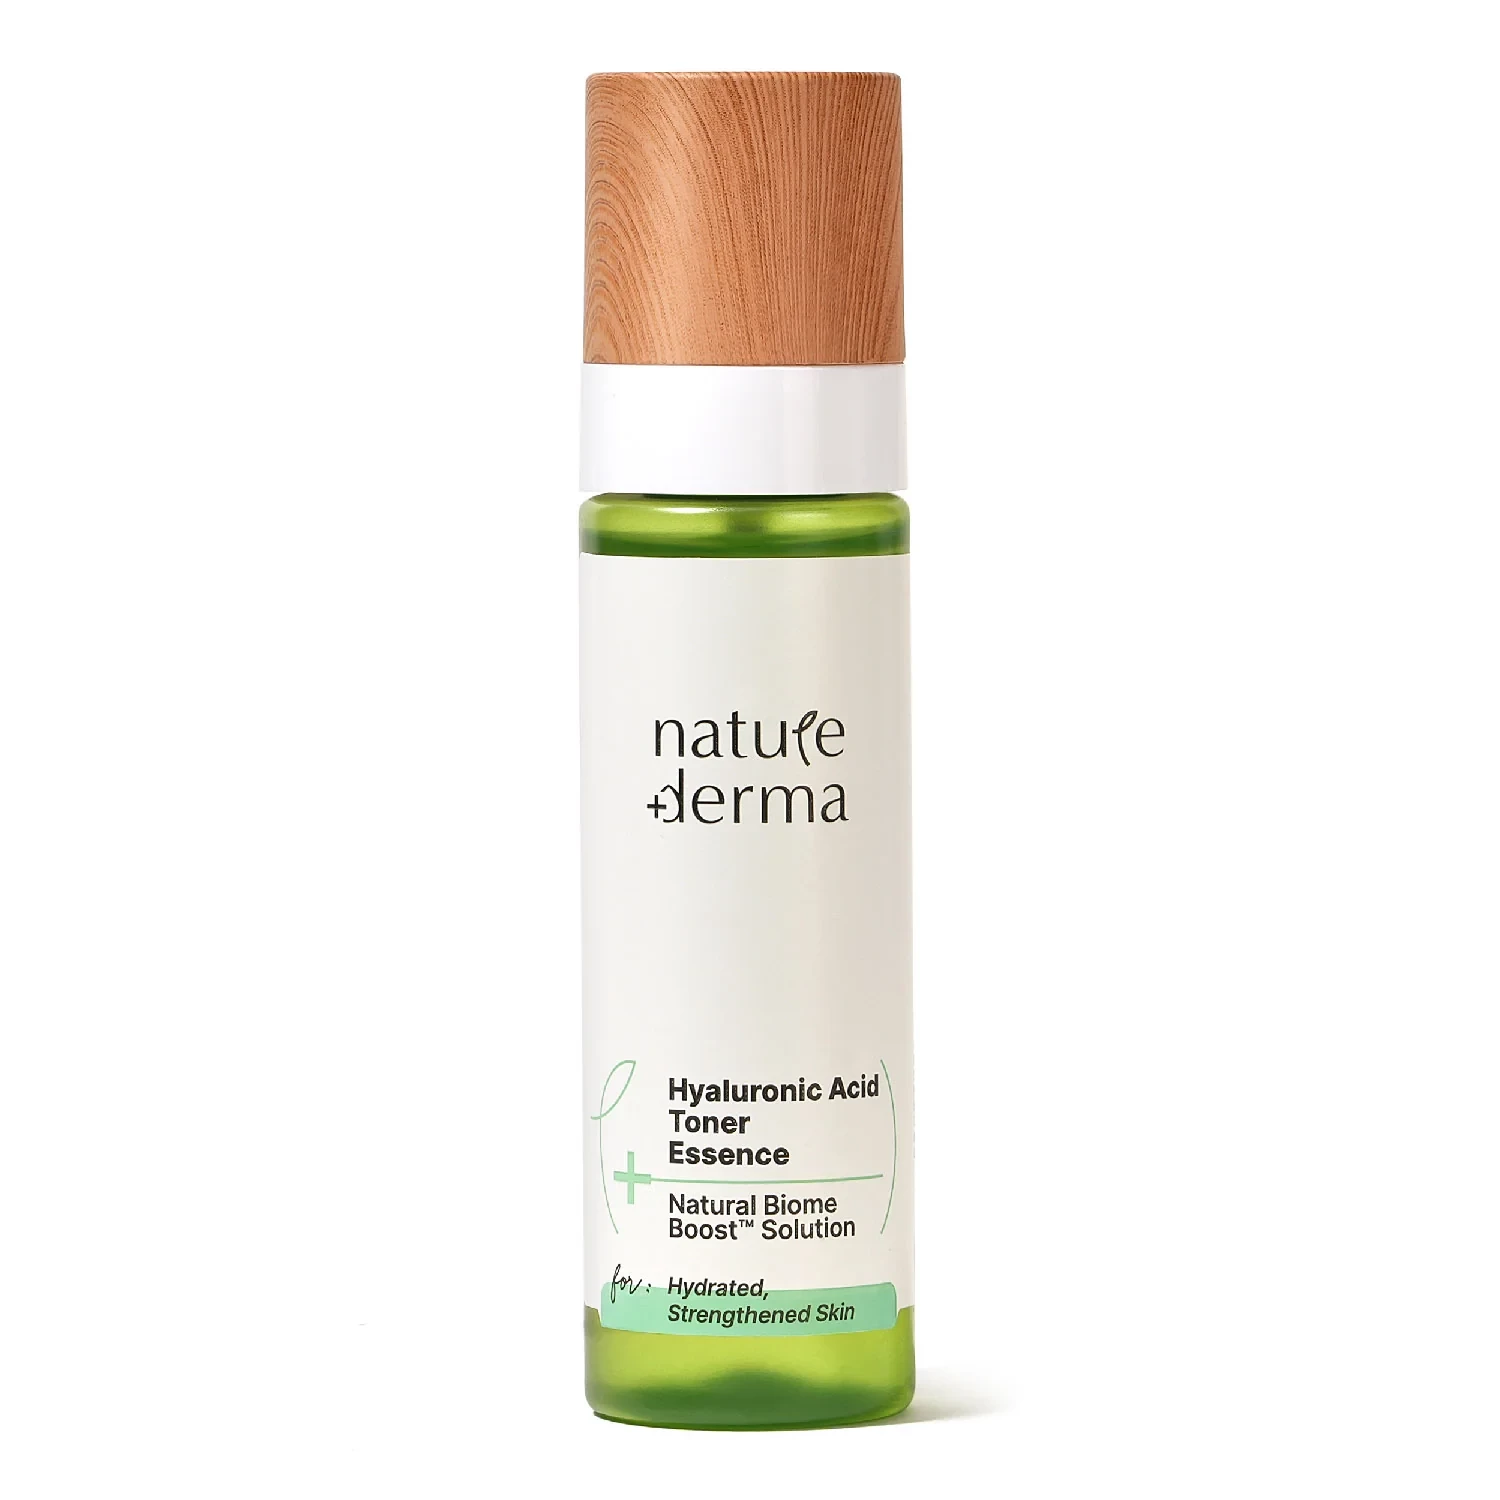 Nature Derma Hyaluronic Acid Toner Essence With Natural Biome-Boost™ Solution - 100 Ml